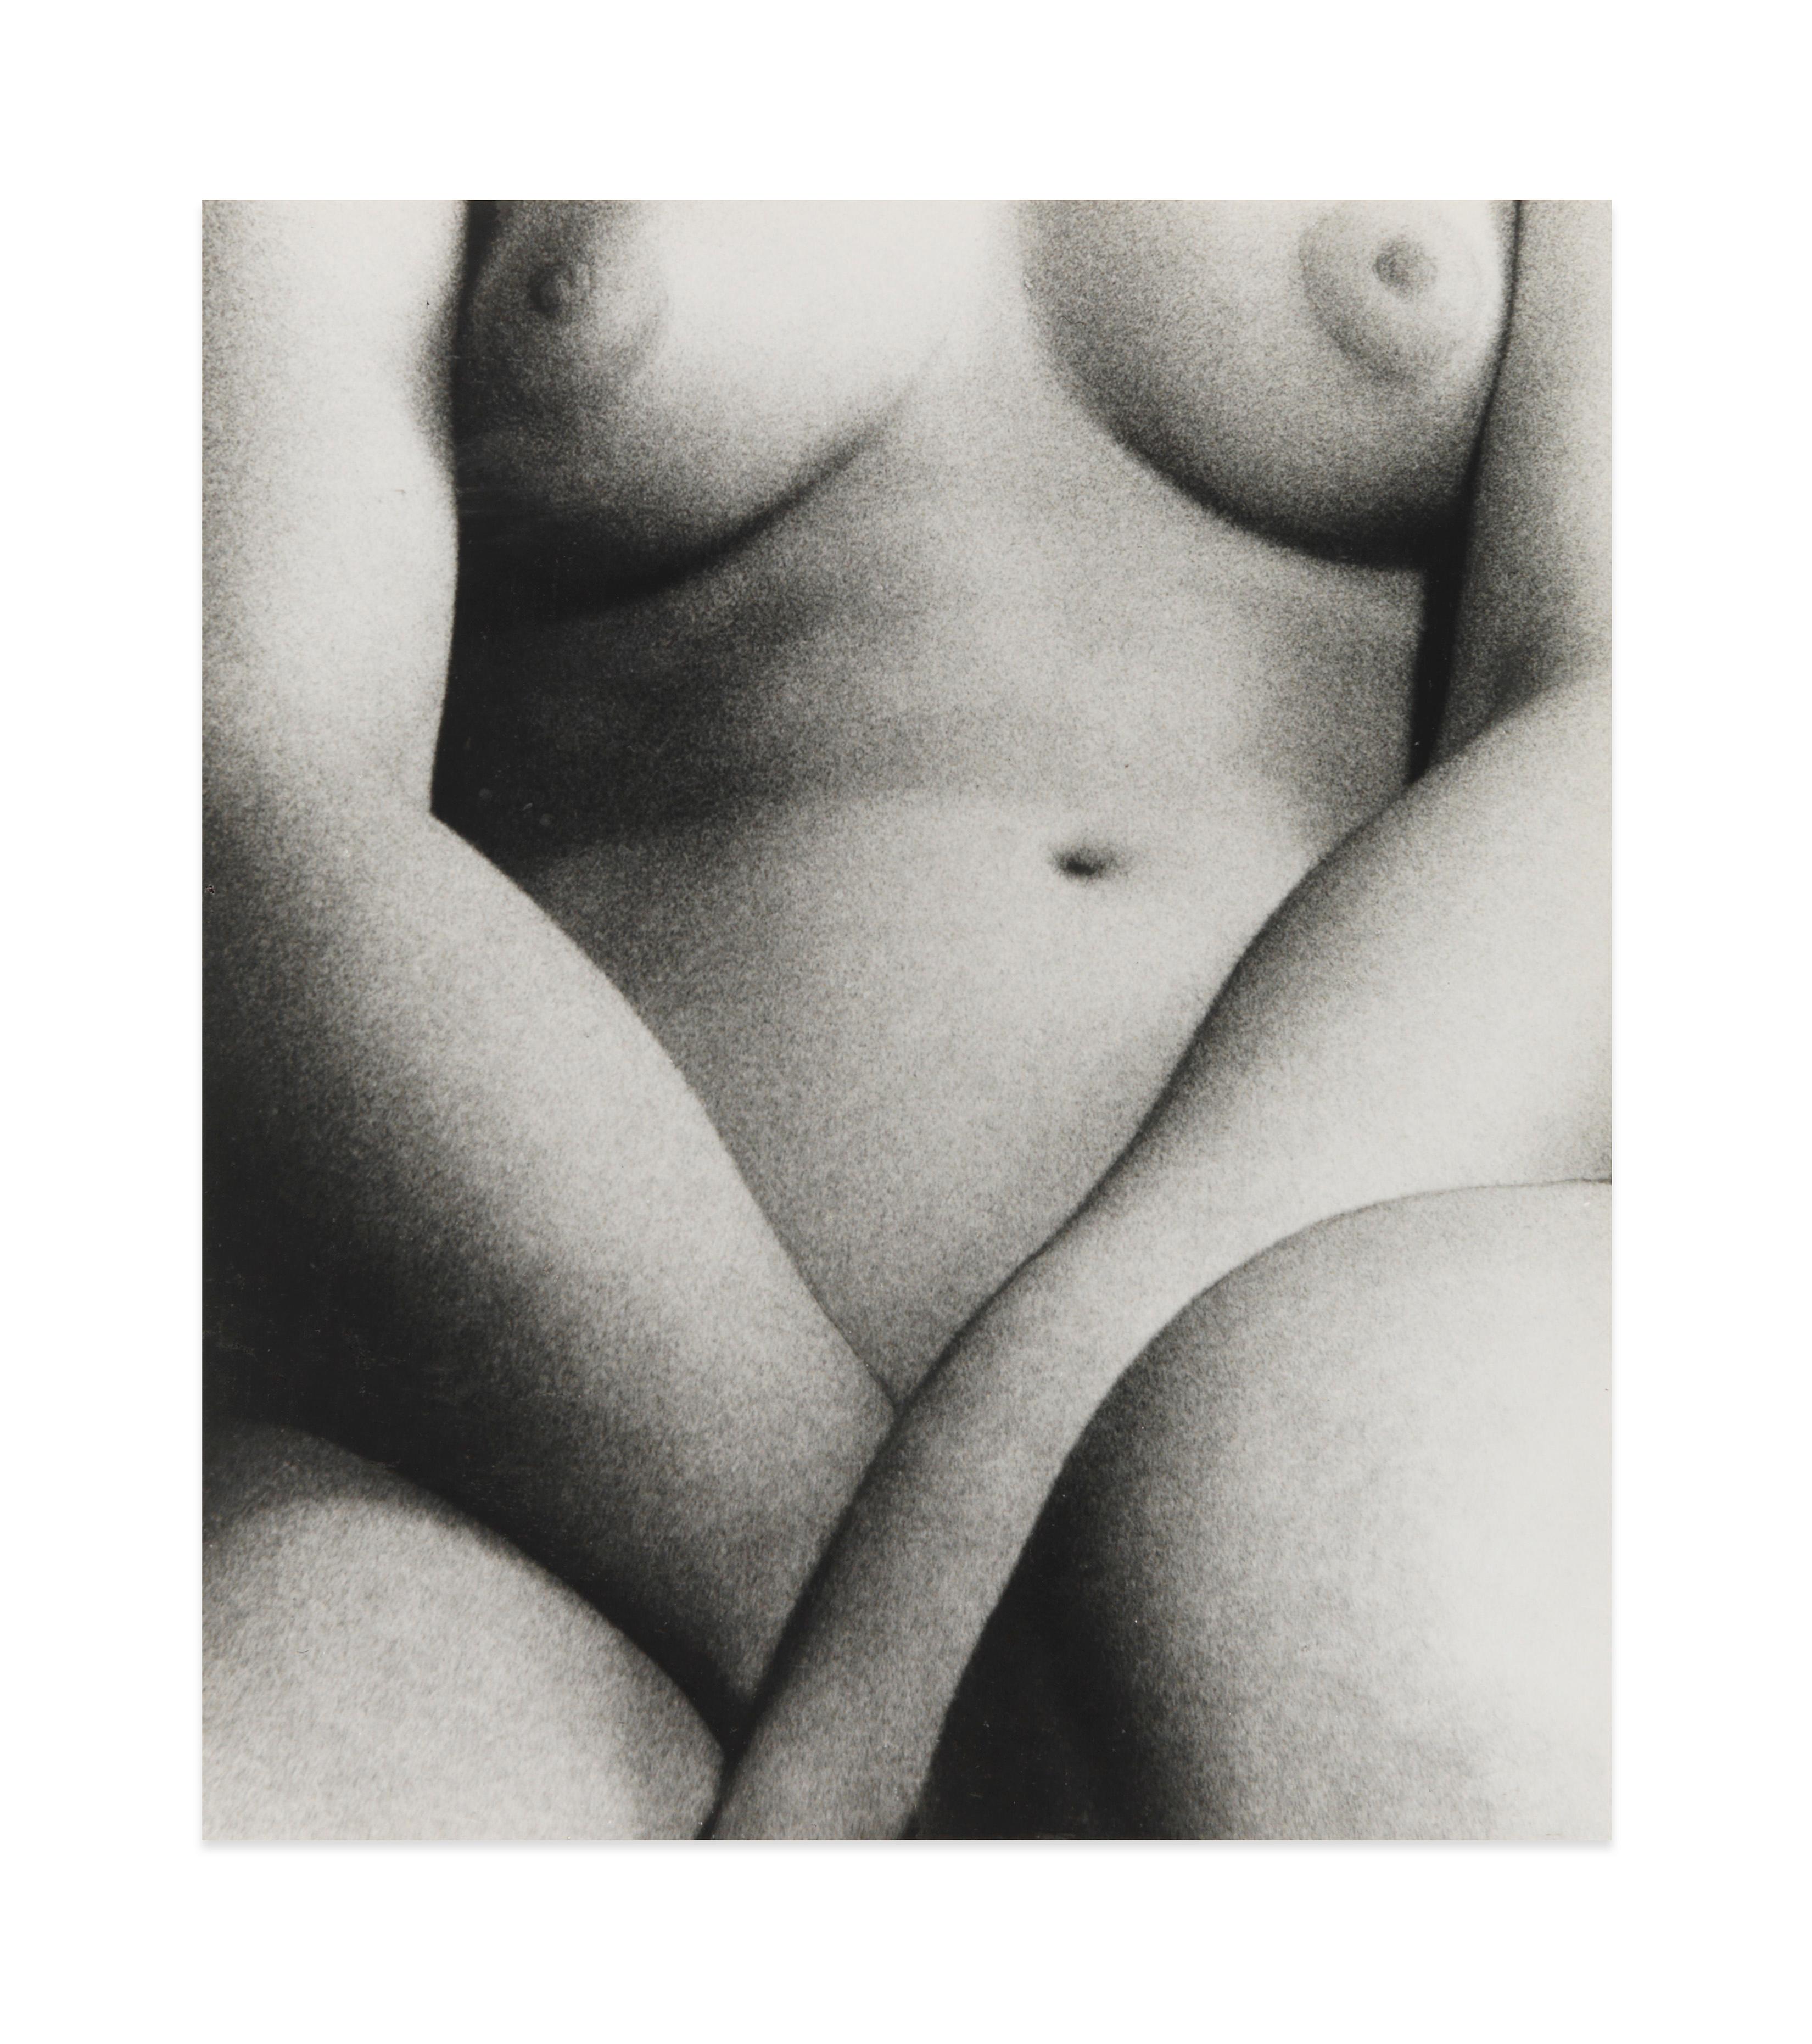 Nude, London - Photograph by Bill Brandt